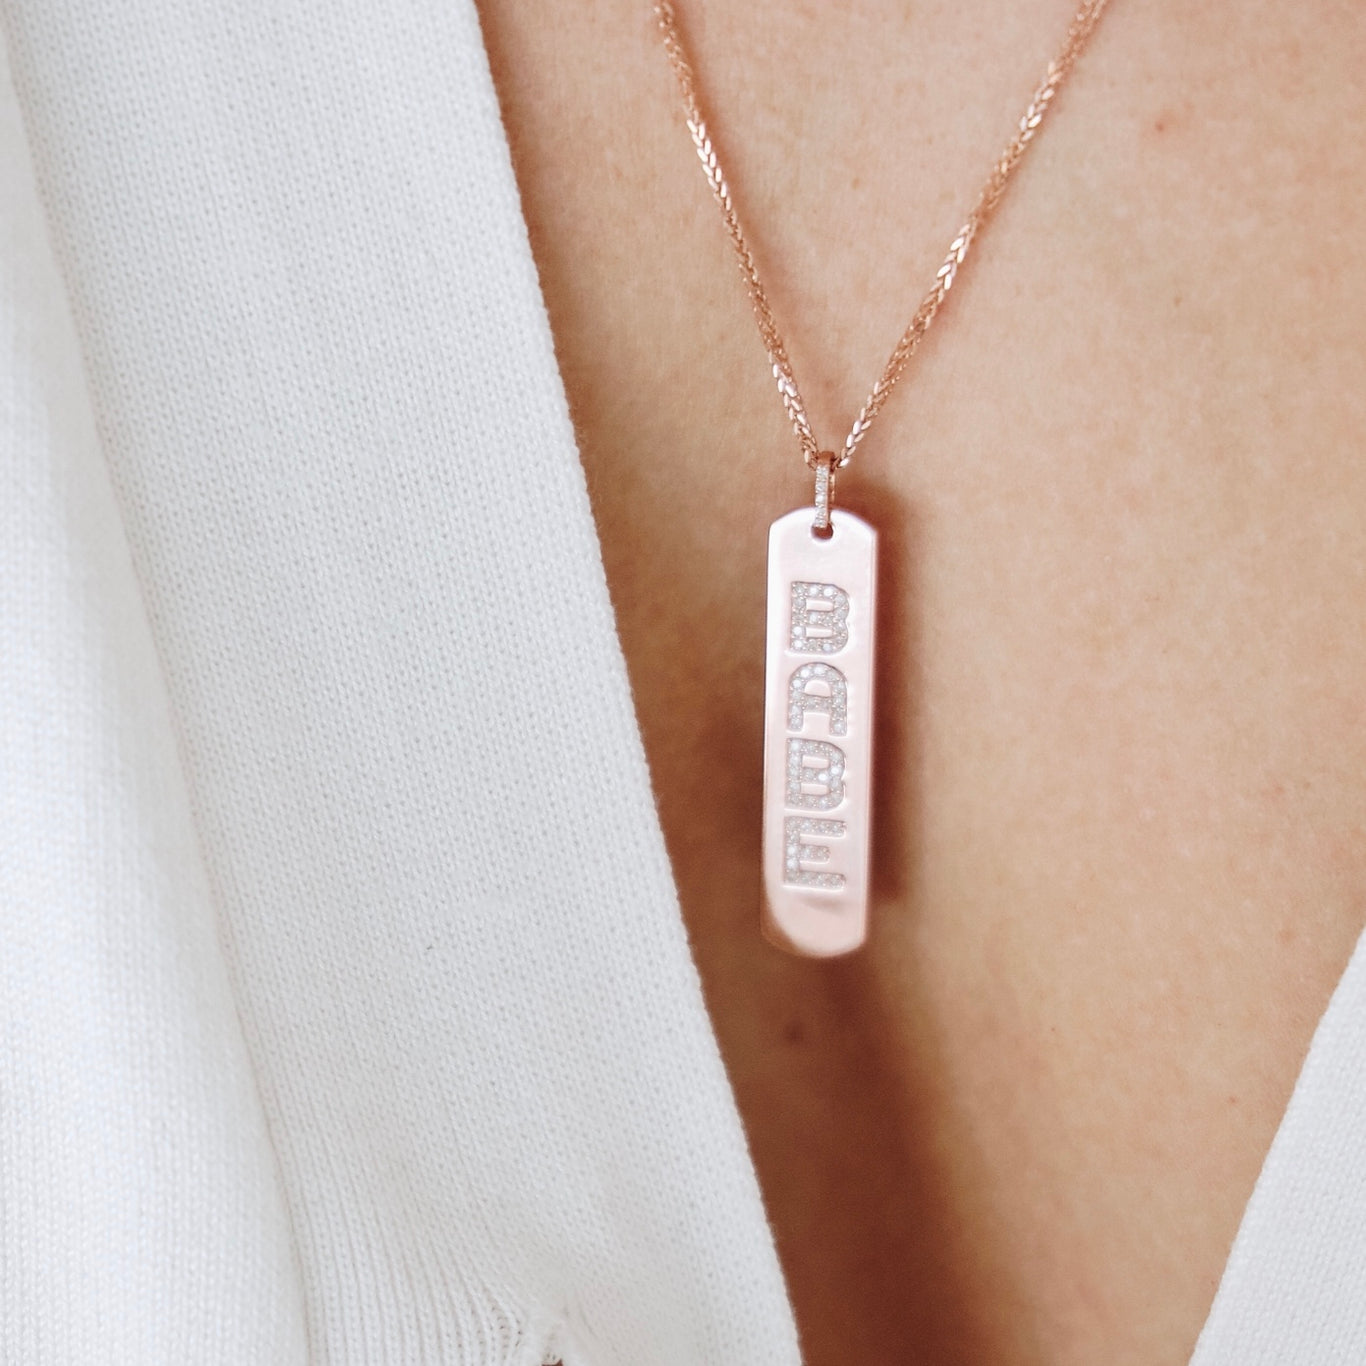 Longtag Necklace shown engraved with "Babe".